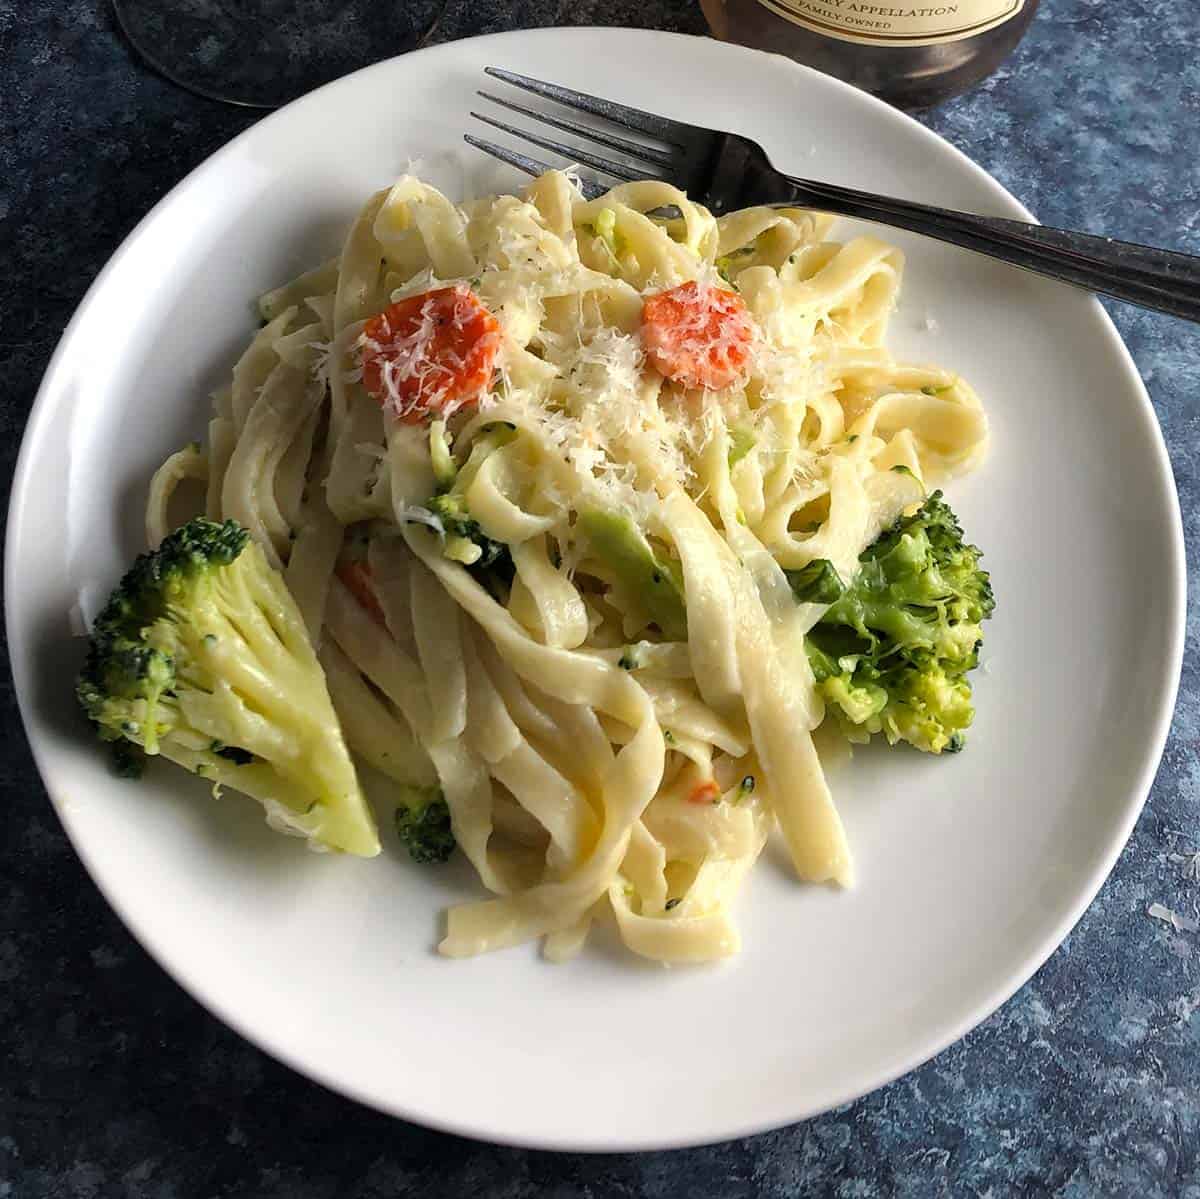 Fettuccine Primavera is a creamy and satisfying pasta dish that is very easy to make.